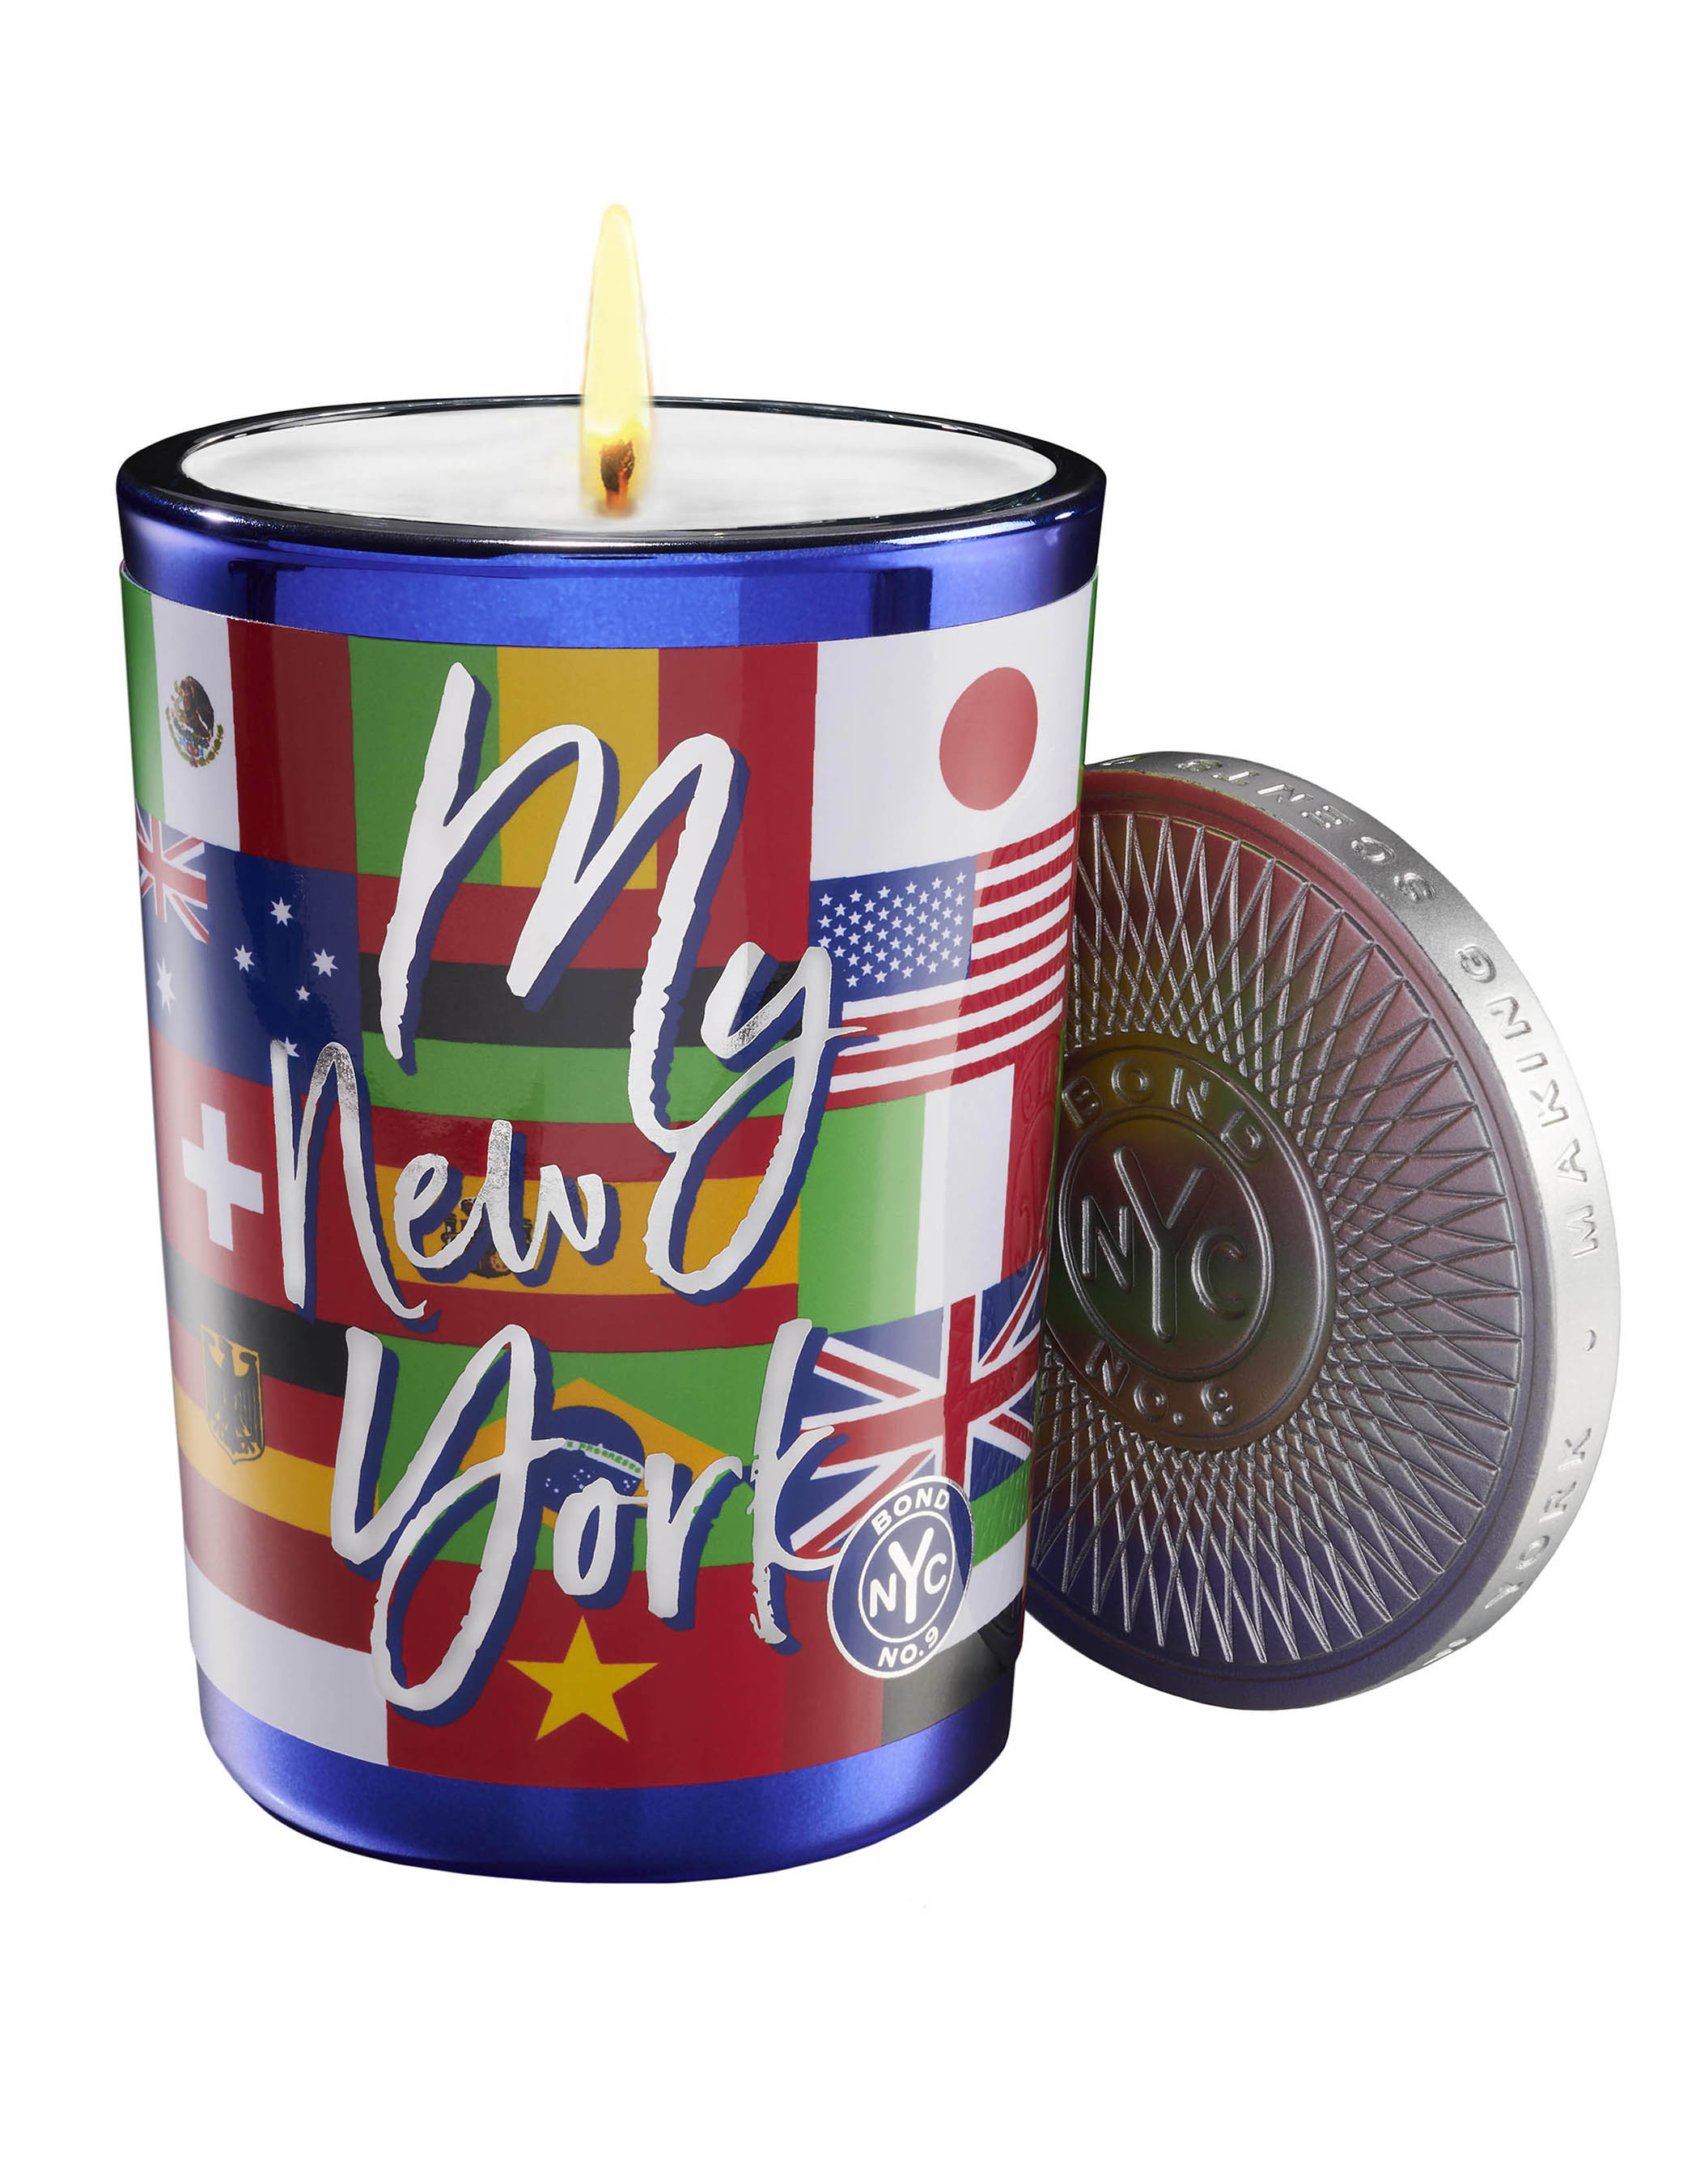 My New York Candle